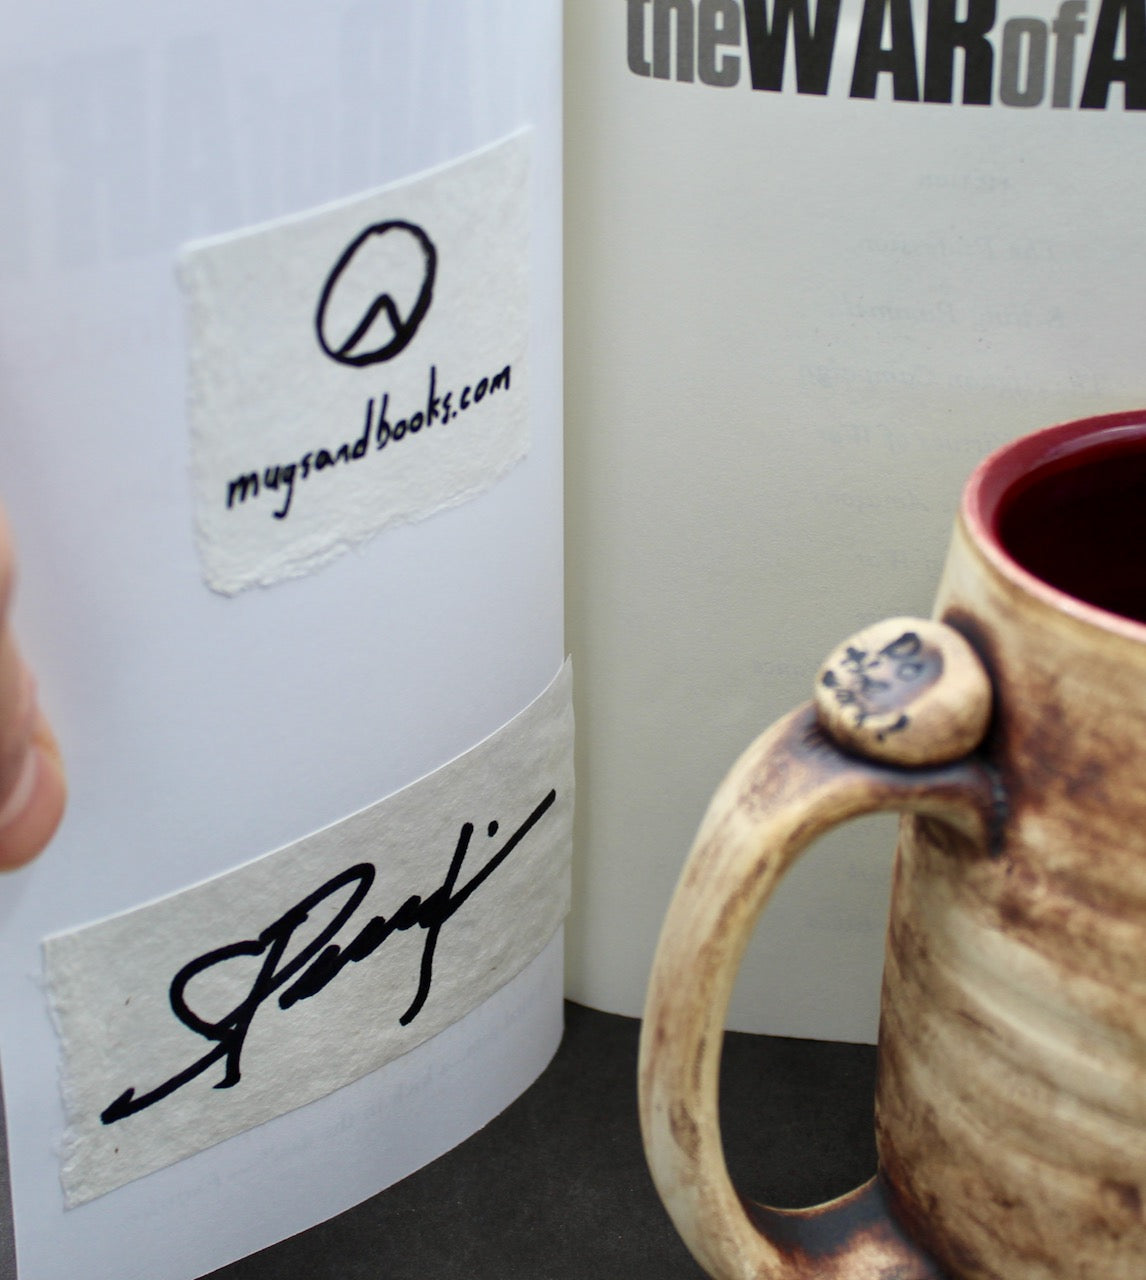 One Bullet Flower Mug and Autographed Book, "The War of Art" by Steven Pressfield (SK7788)